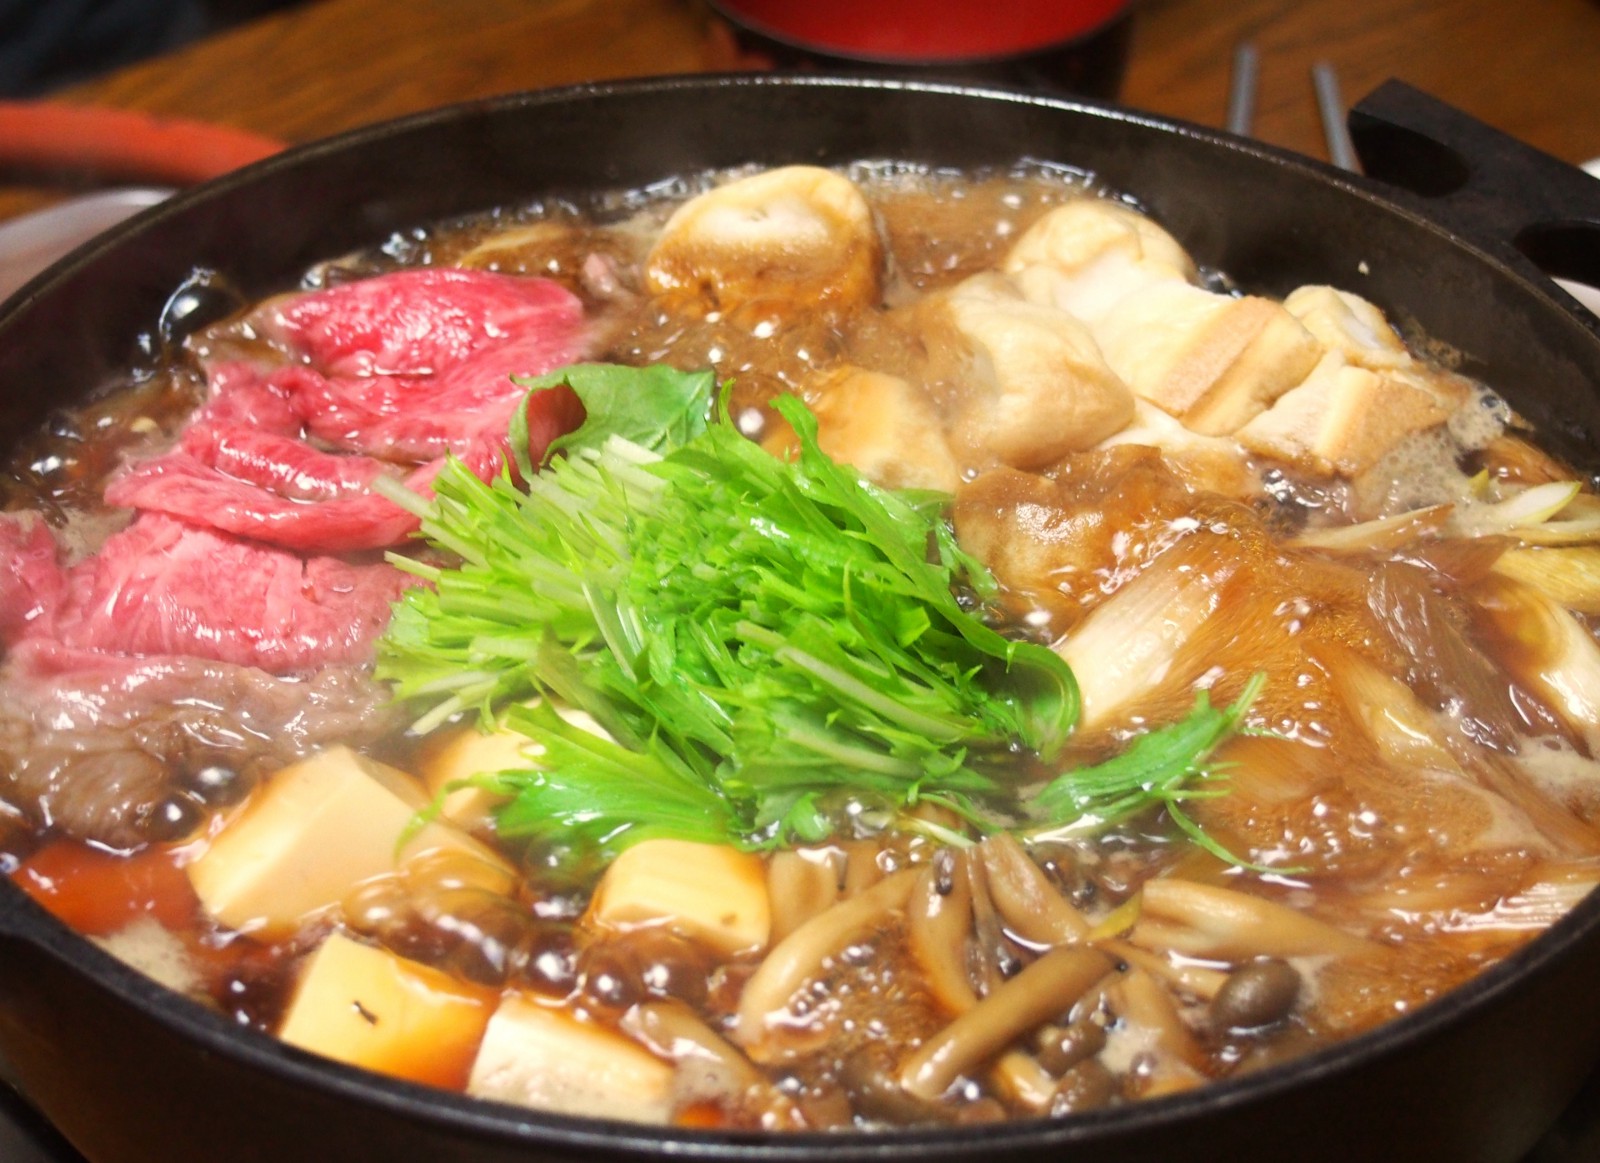 Delicious and warm Nabe (Japanese hot pot dish)